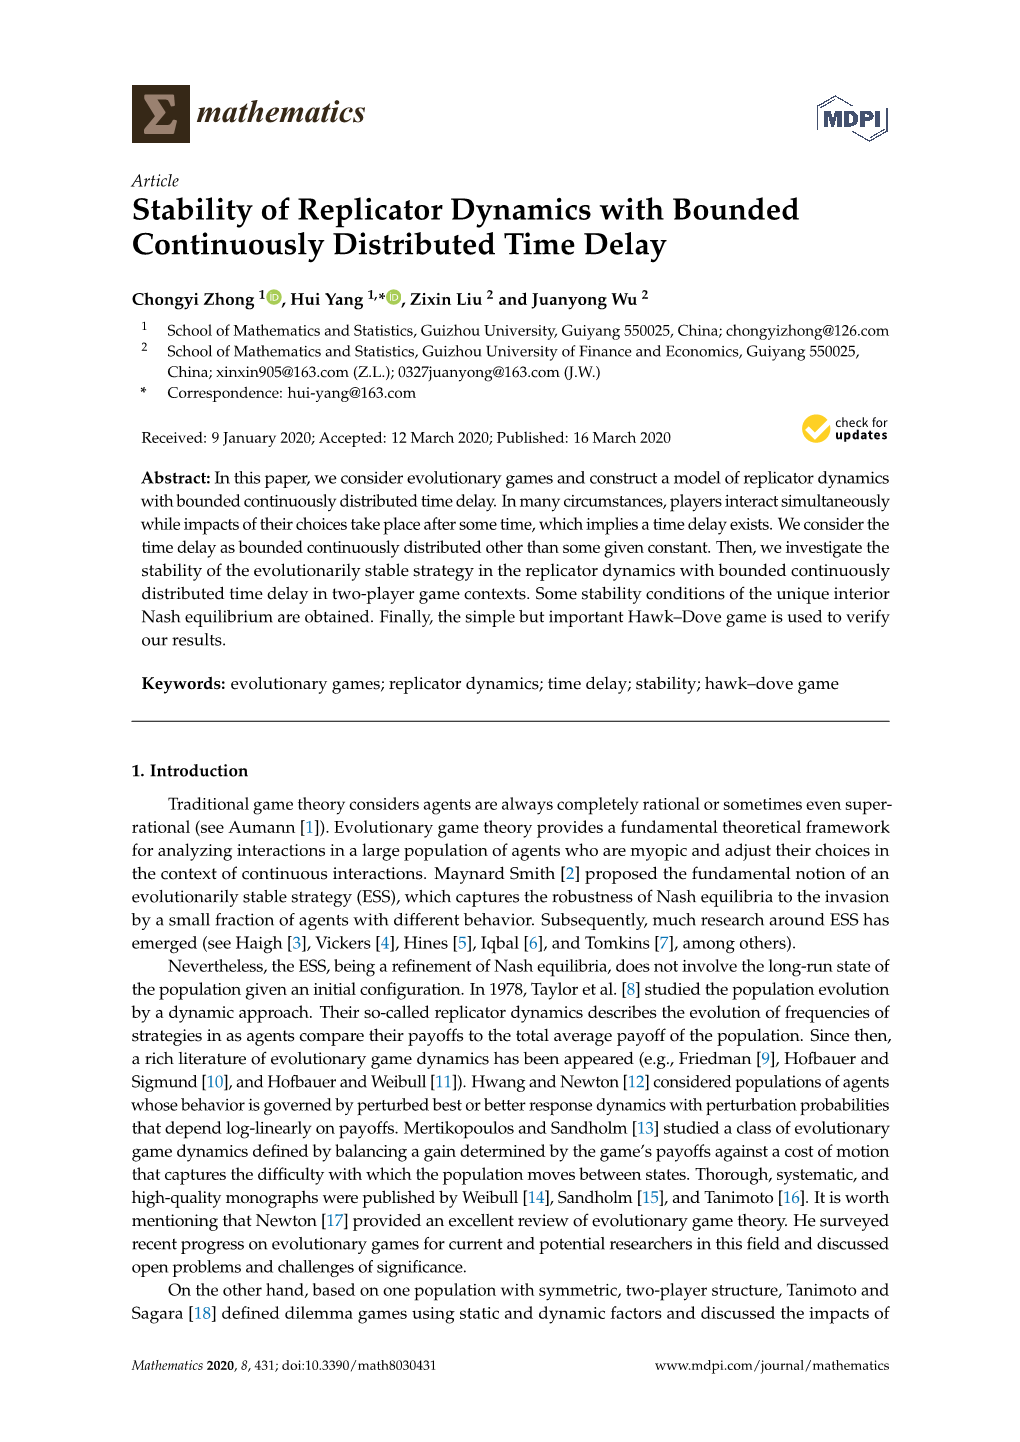 Stability of Replicator Dynamics with Bounded Continuously Distributed Time Delay